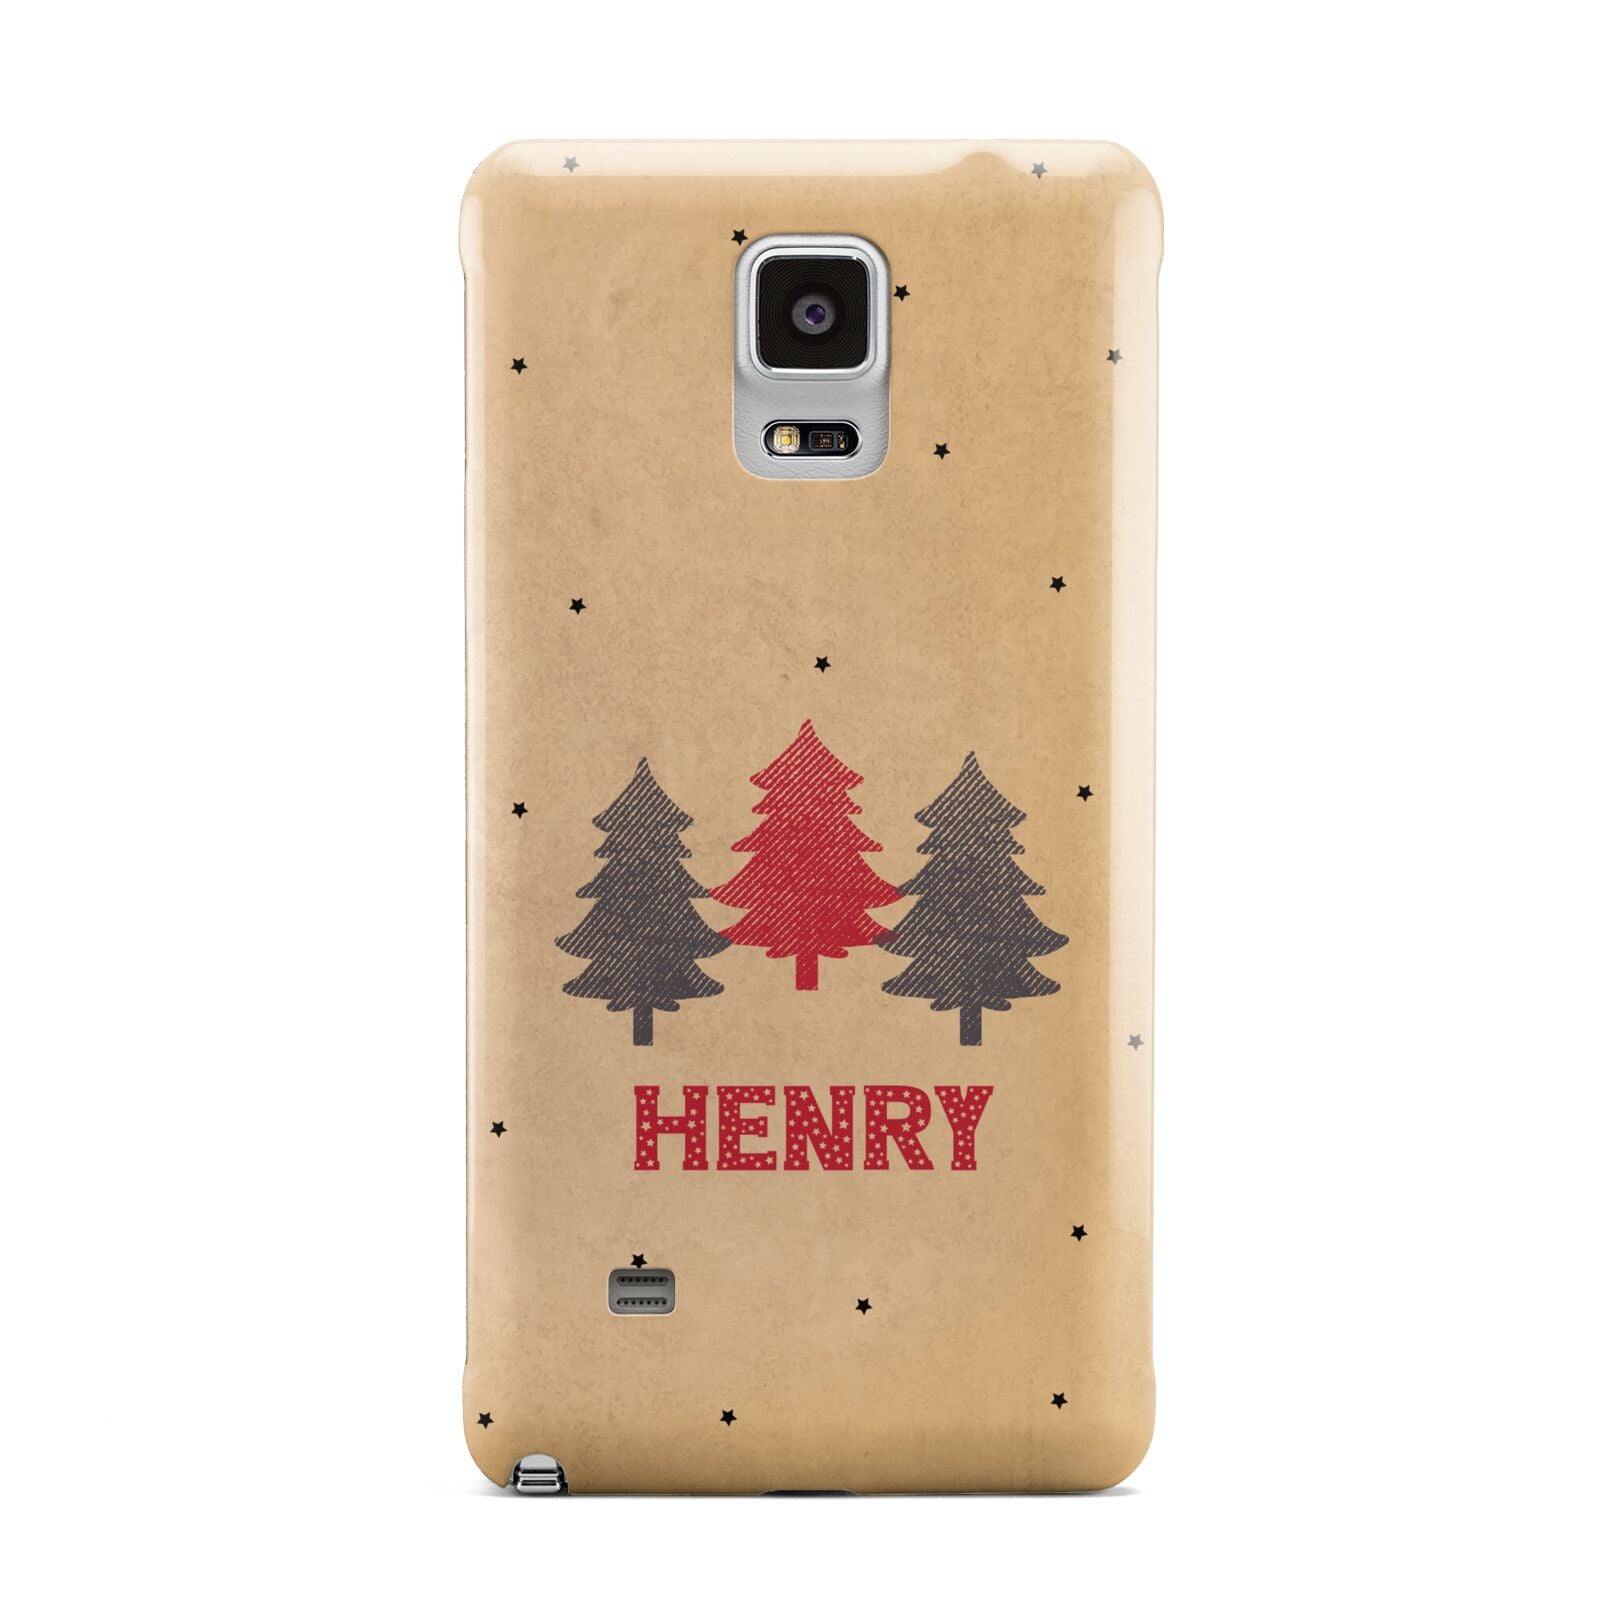 Personalised Christmas Tree Samsung Galaxy Note 4 Case